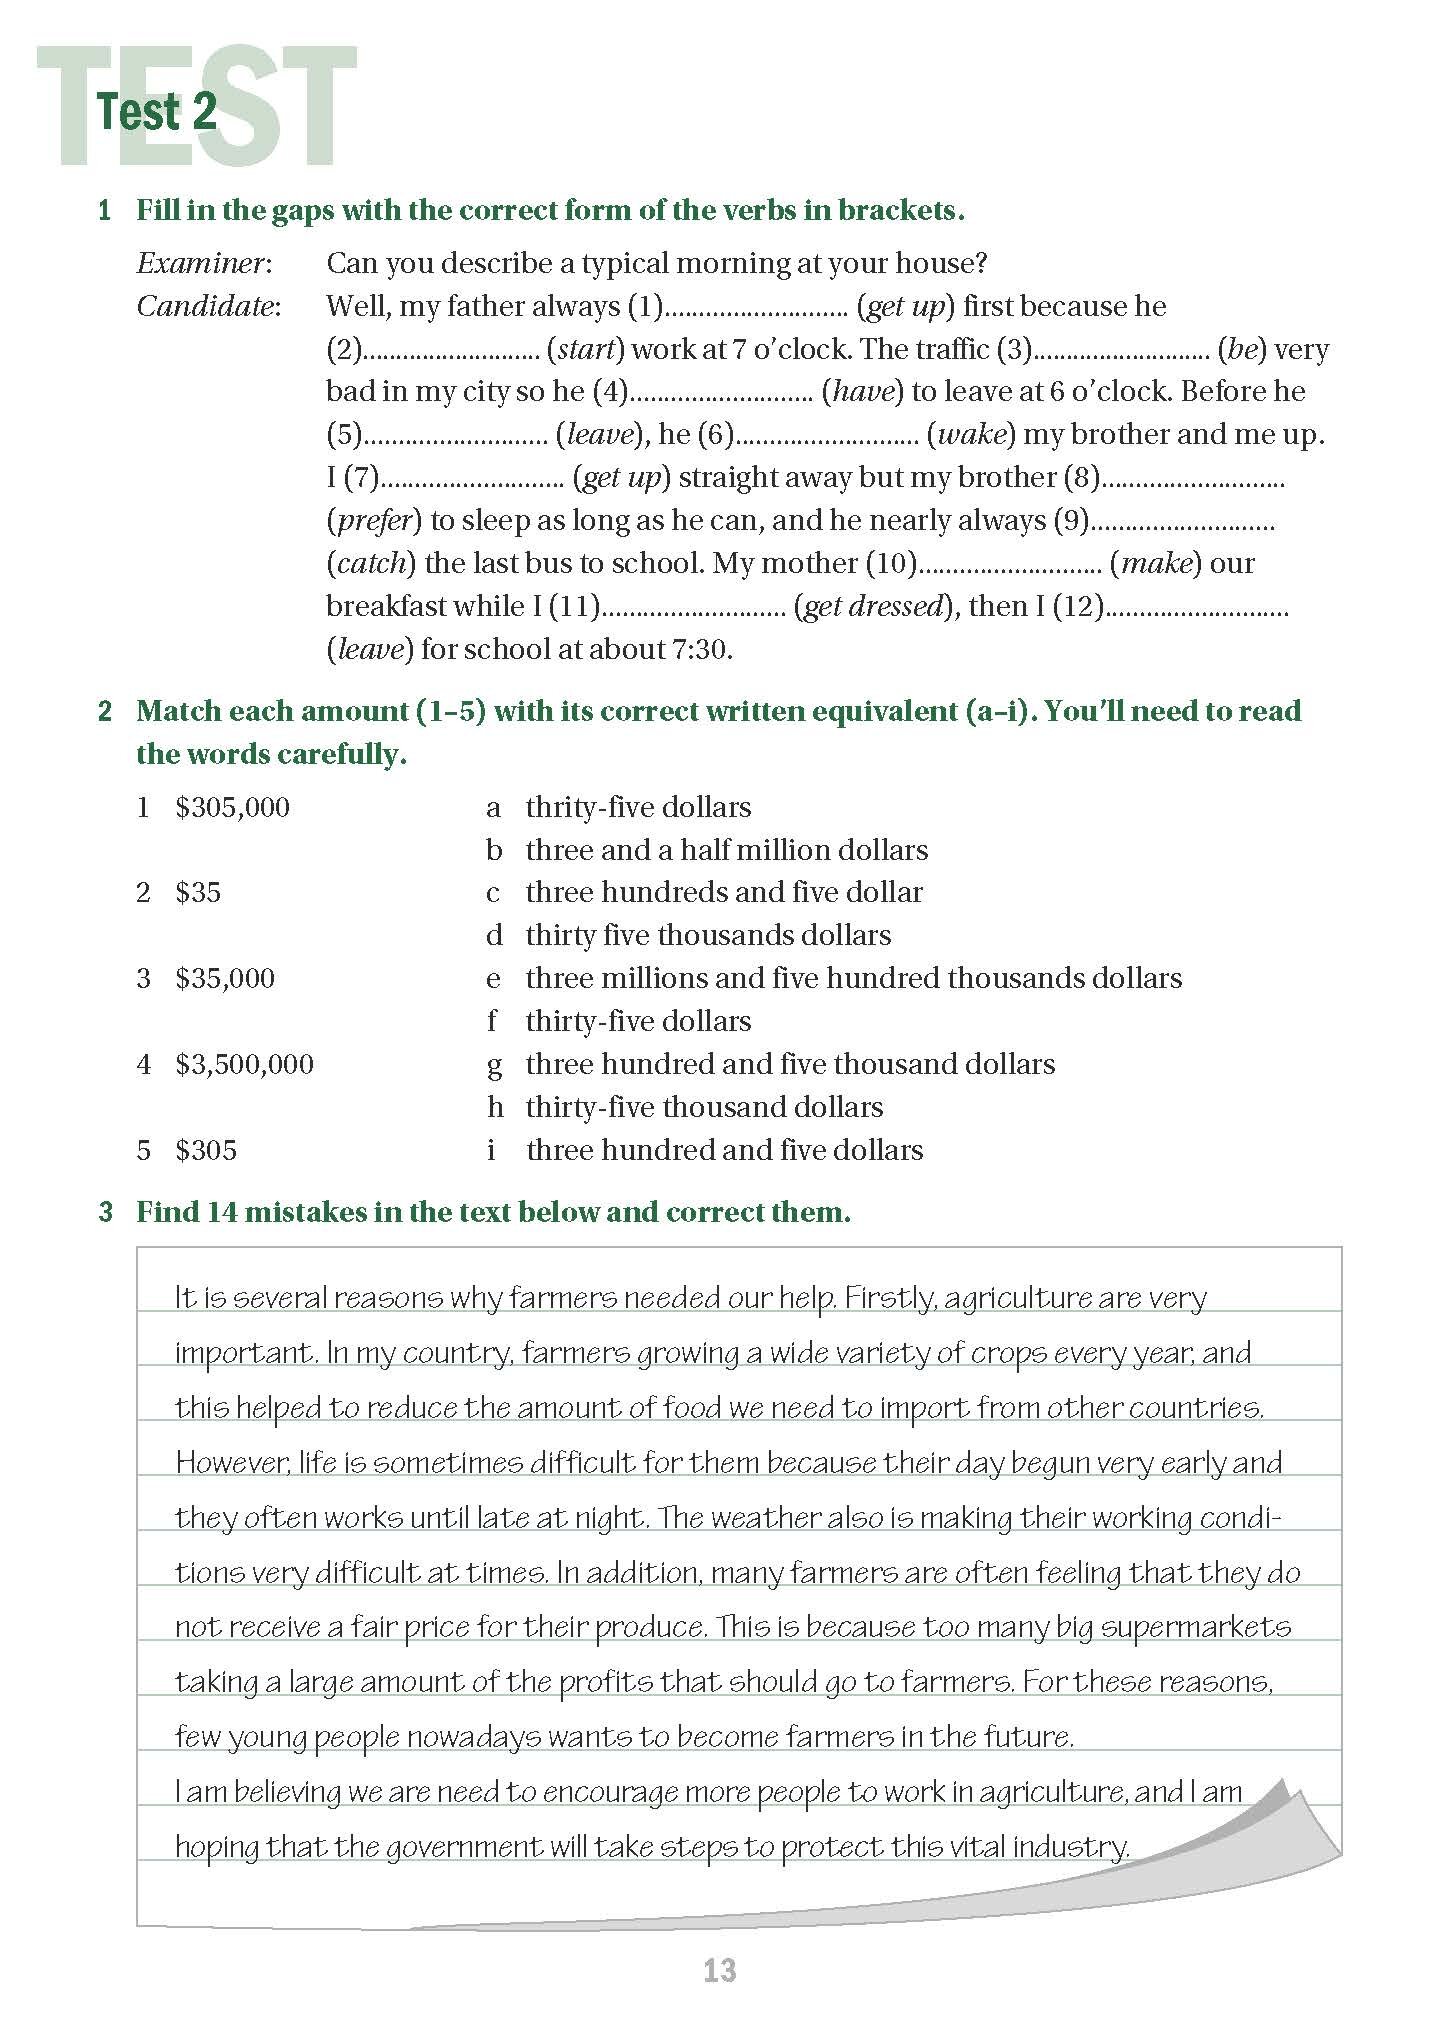 IELTS Common Mistakes for Bands 5.0-6.0 - фото №5